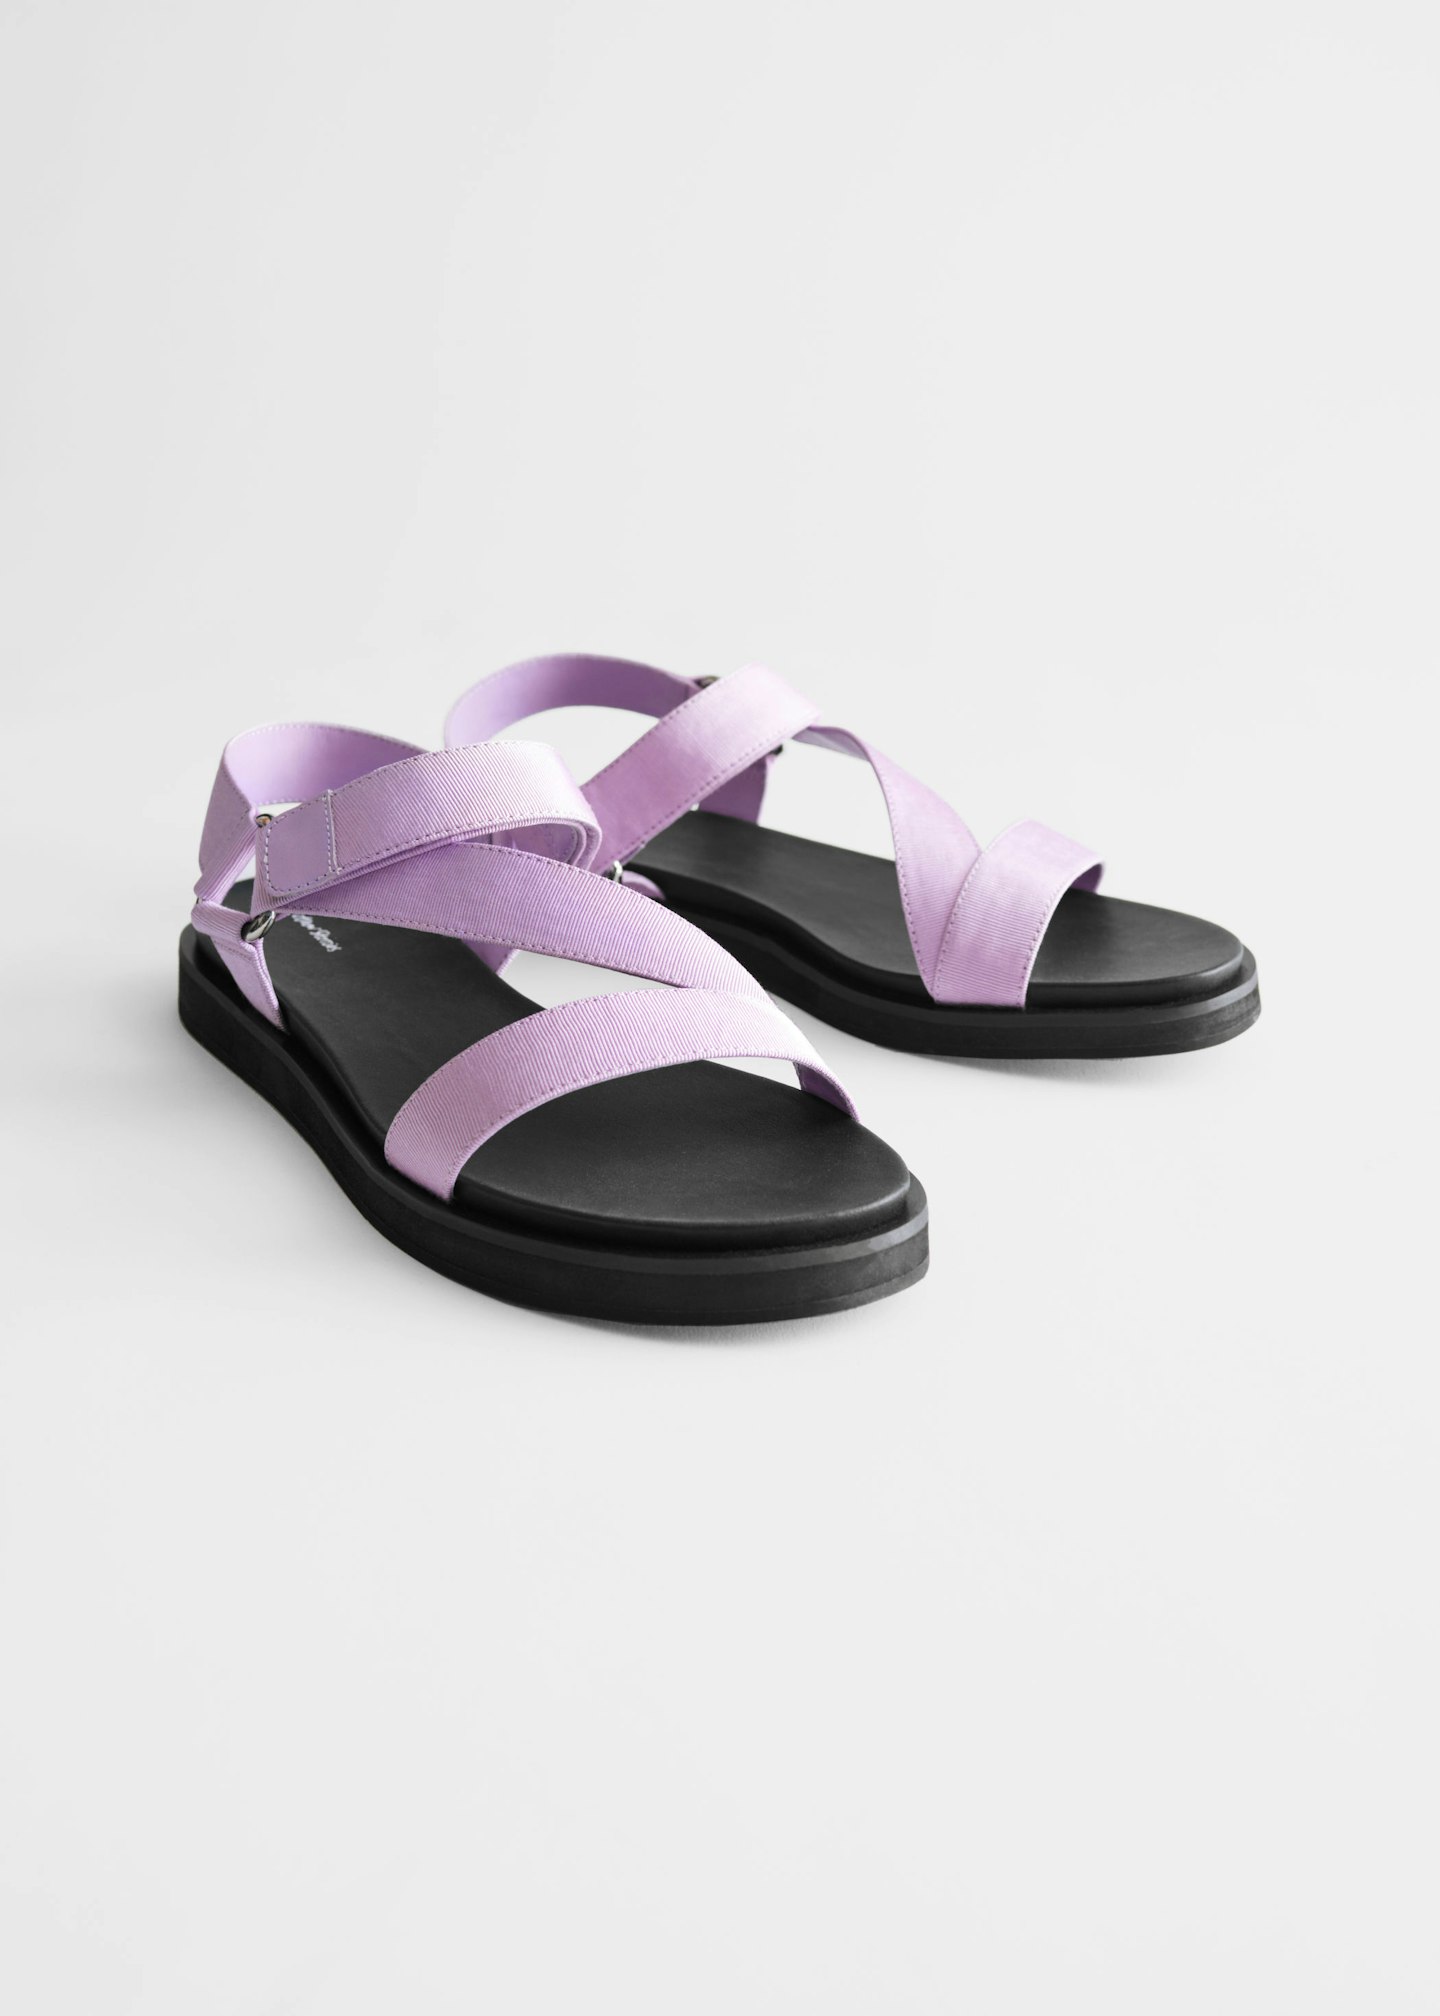 & Other Stories, Criss Cross Strap Sandals, £65